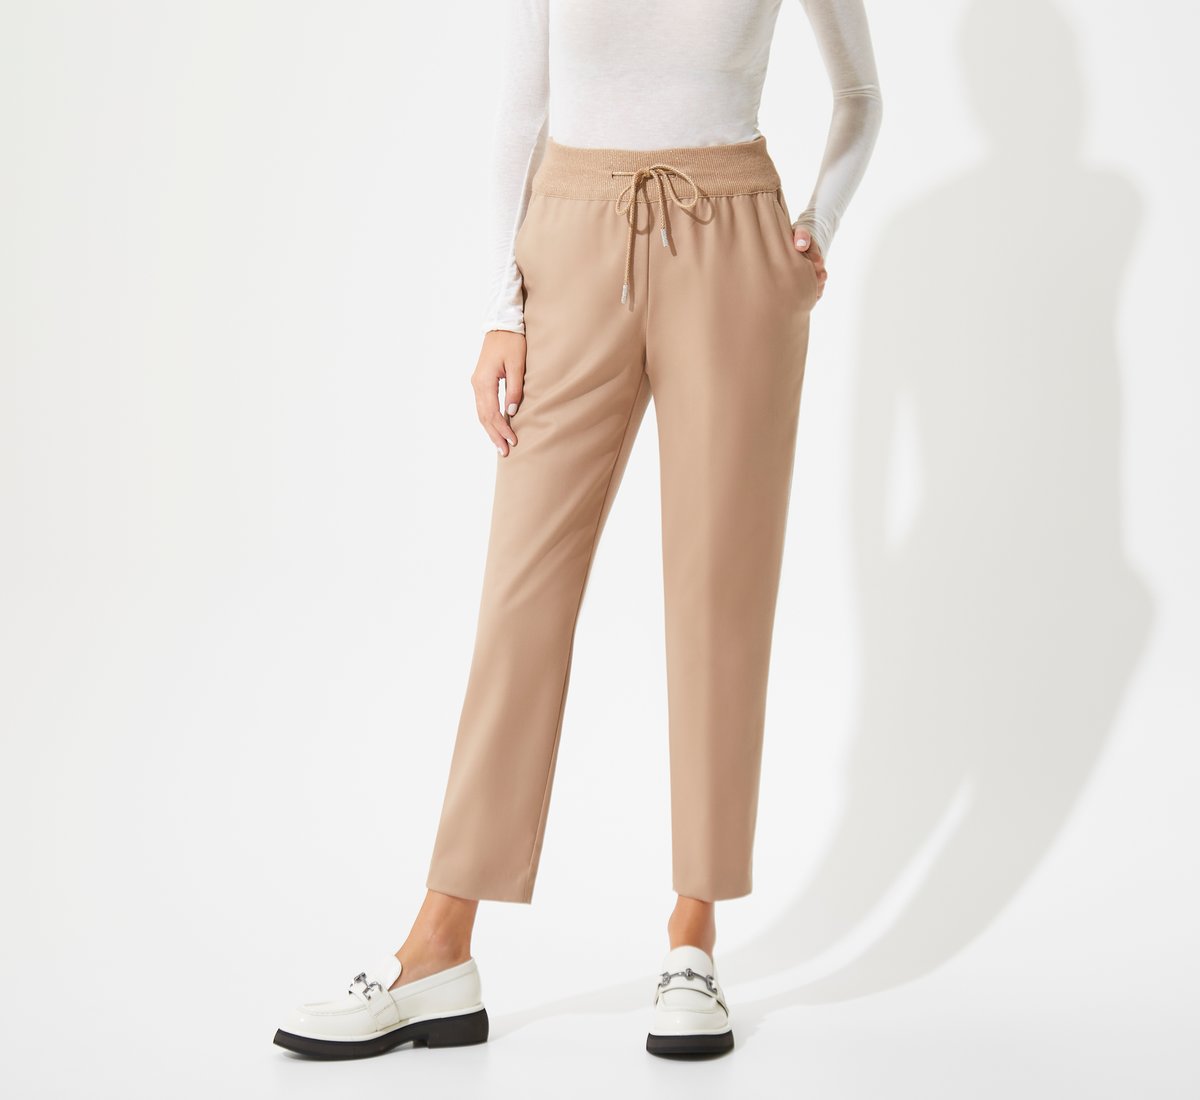 Powder pink elasticated trousers